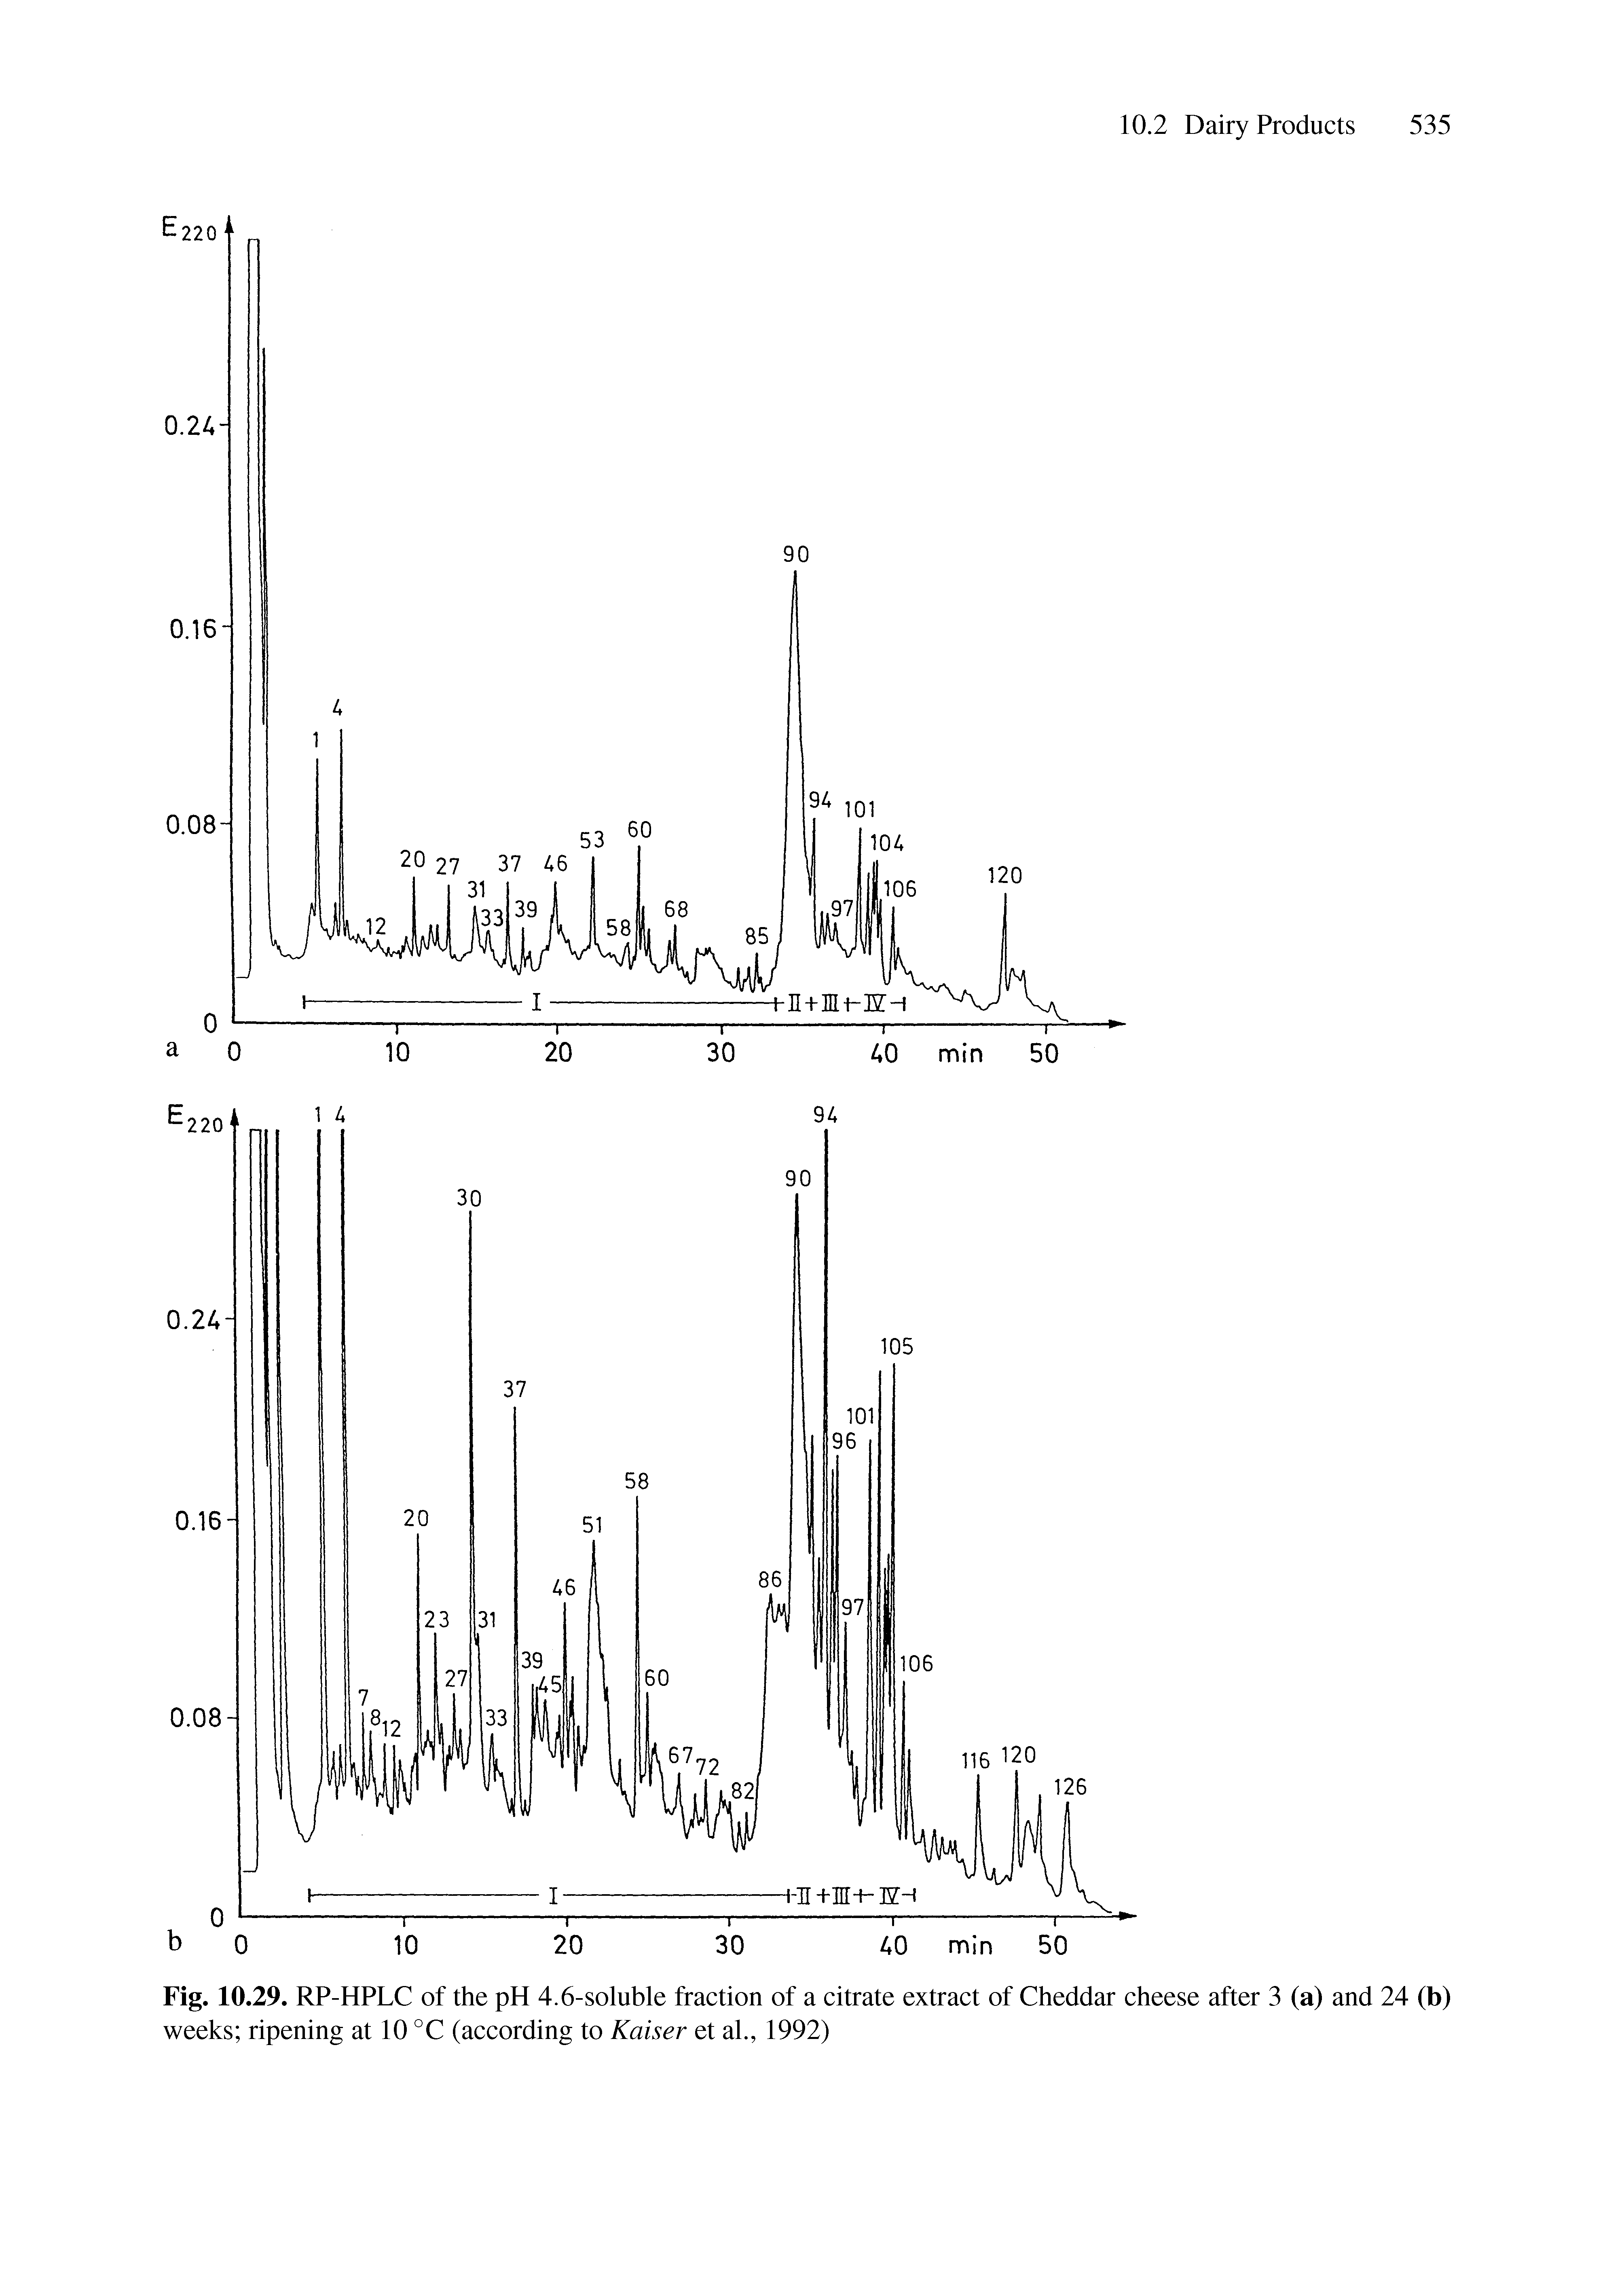 Fig. 10.29. RP-HPLC of the pH 4.6-soluble fraction of a citrate extract of Cheddar cheese after 3 (a) and 24 (b) weeks ripening at 10 °C (according to Kaiser et ah, 1992)...